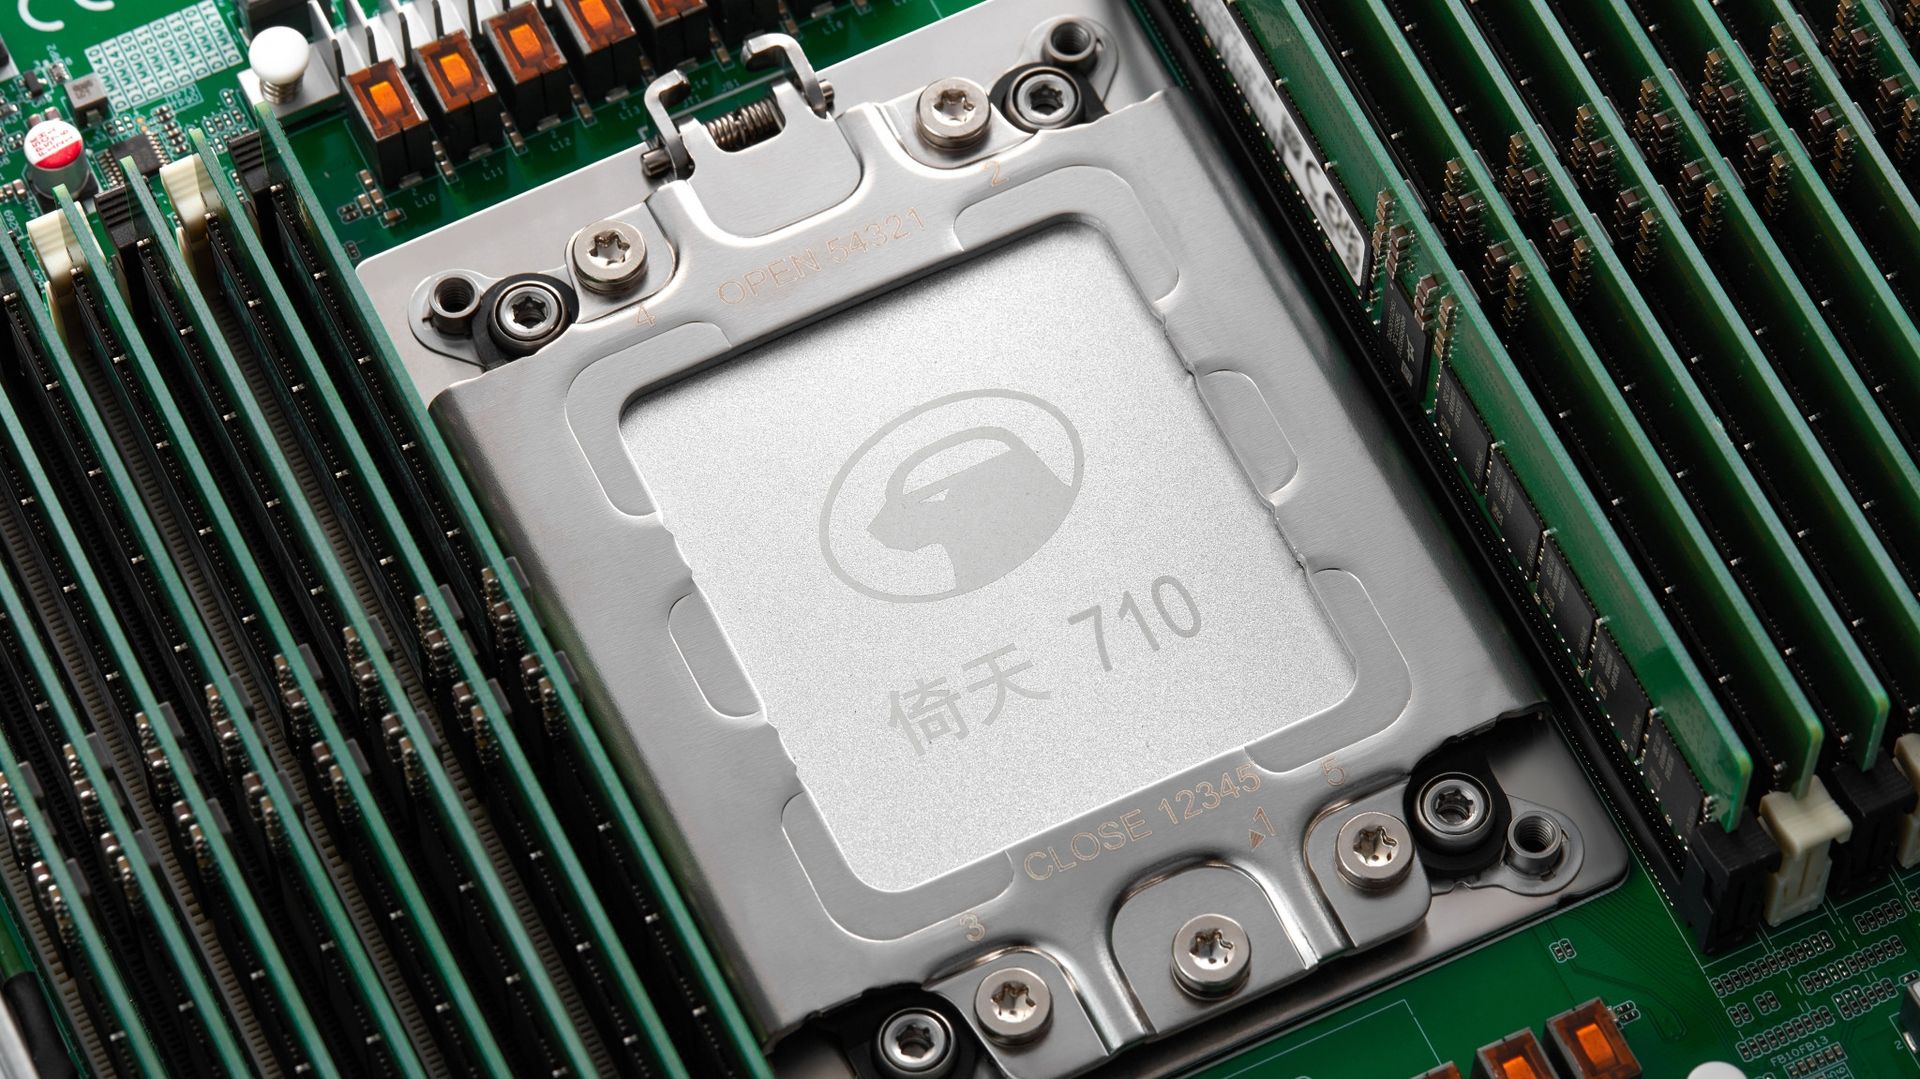 microsoft, chinese server cpu beats microsoft, google and aws rivals to grab performance crown — alibaba's yitian 710 is quickest server cpu but it is based on arm rather than risc and x86 is likely to be the overall speed champion